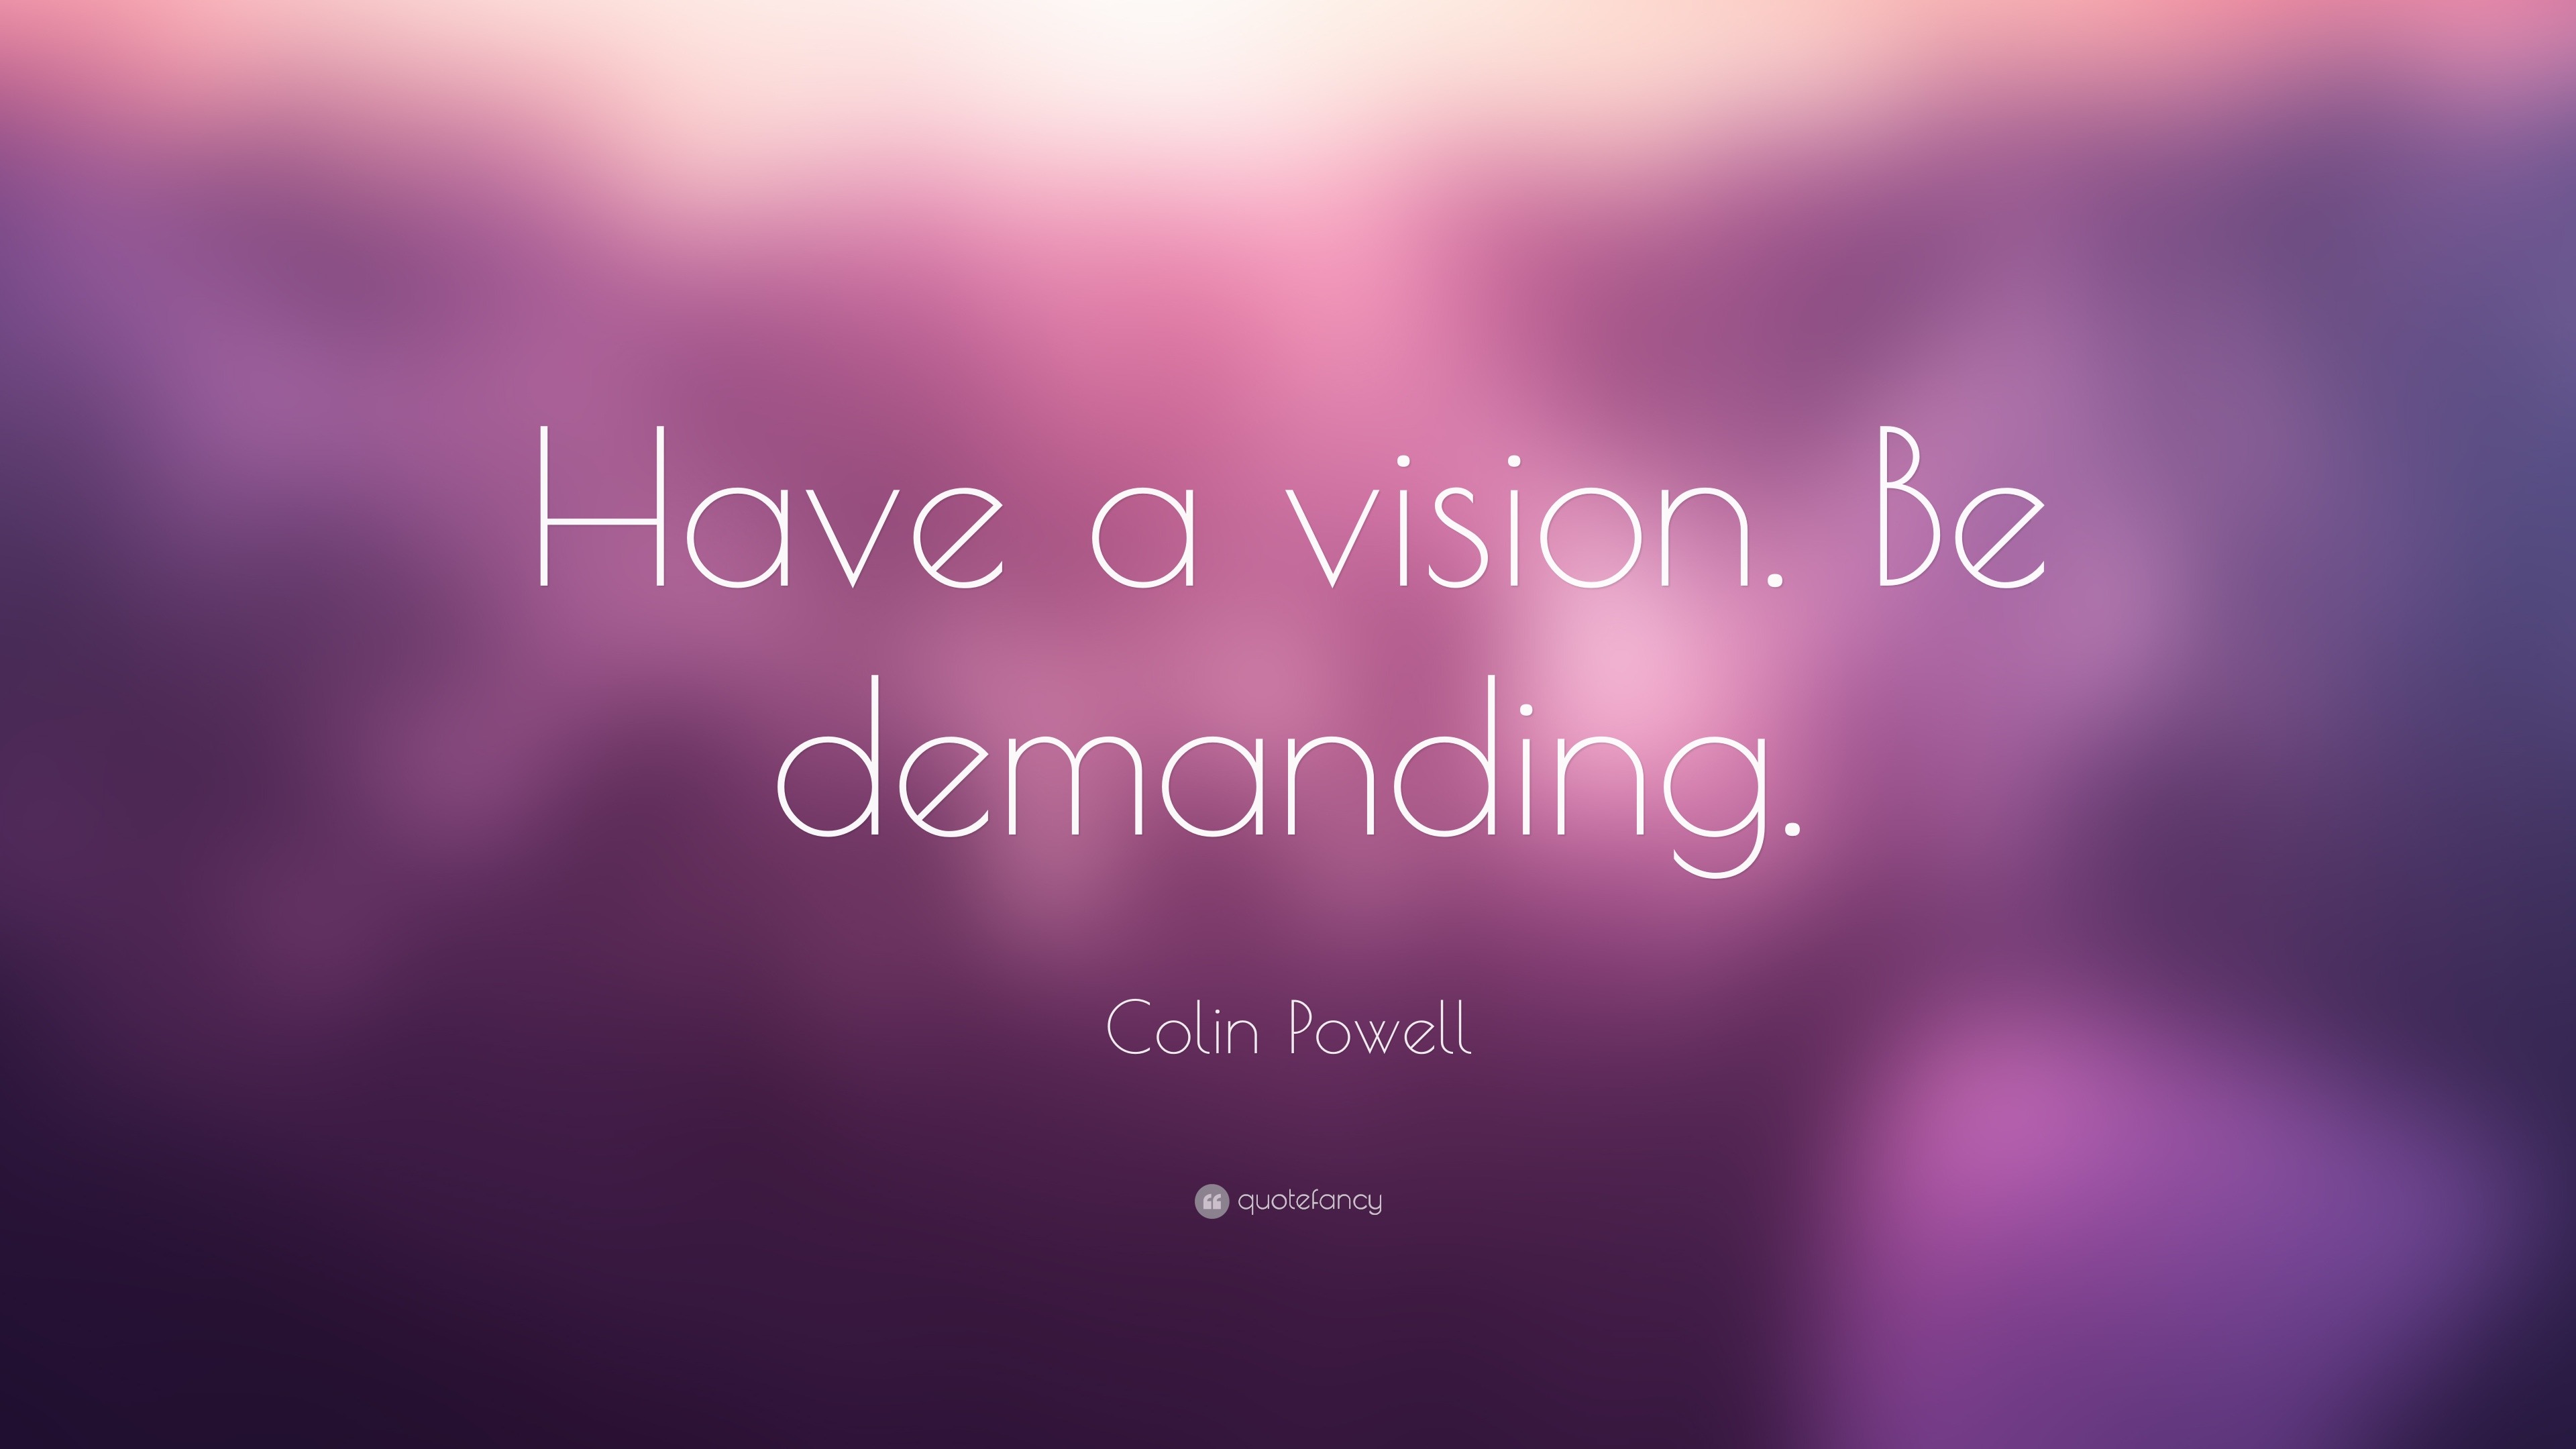 Colin Powell Quote: “Have a vision. Be demanding.”